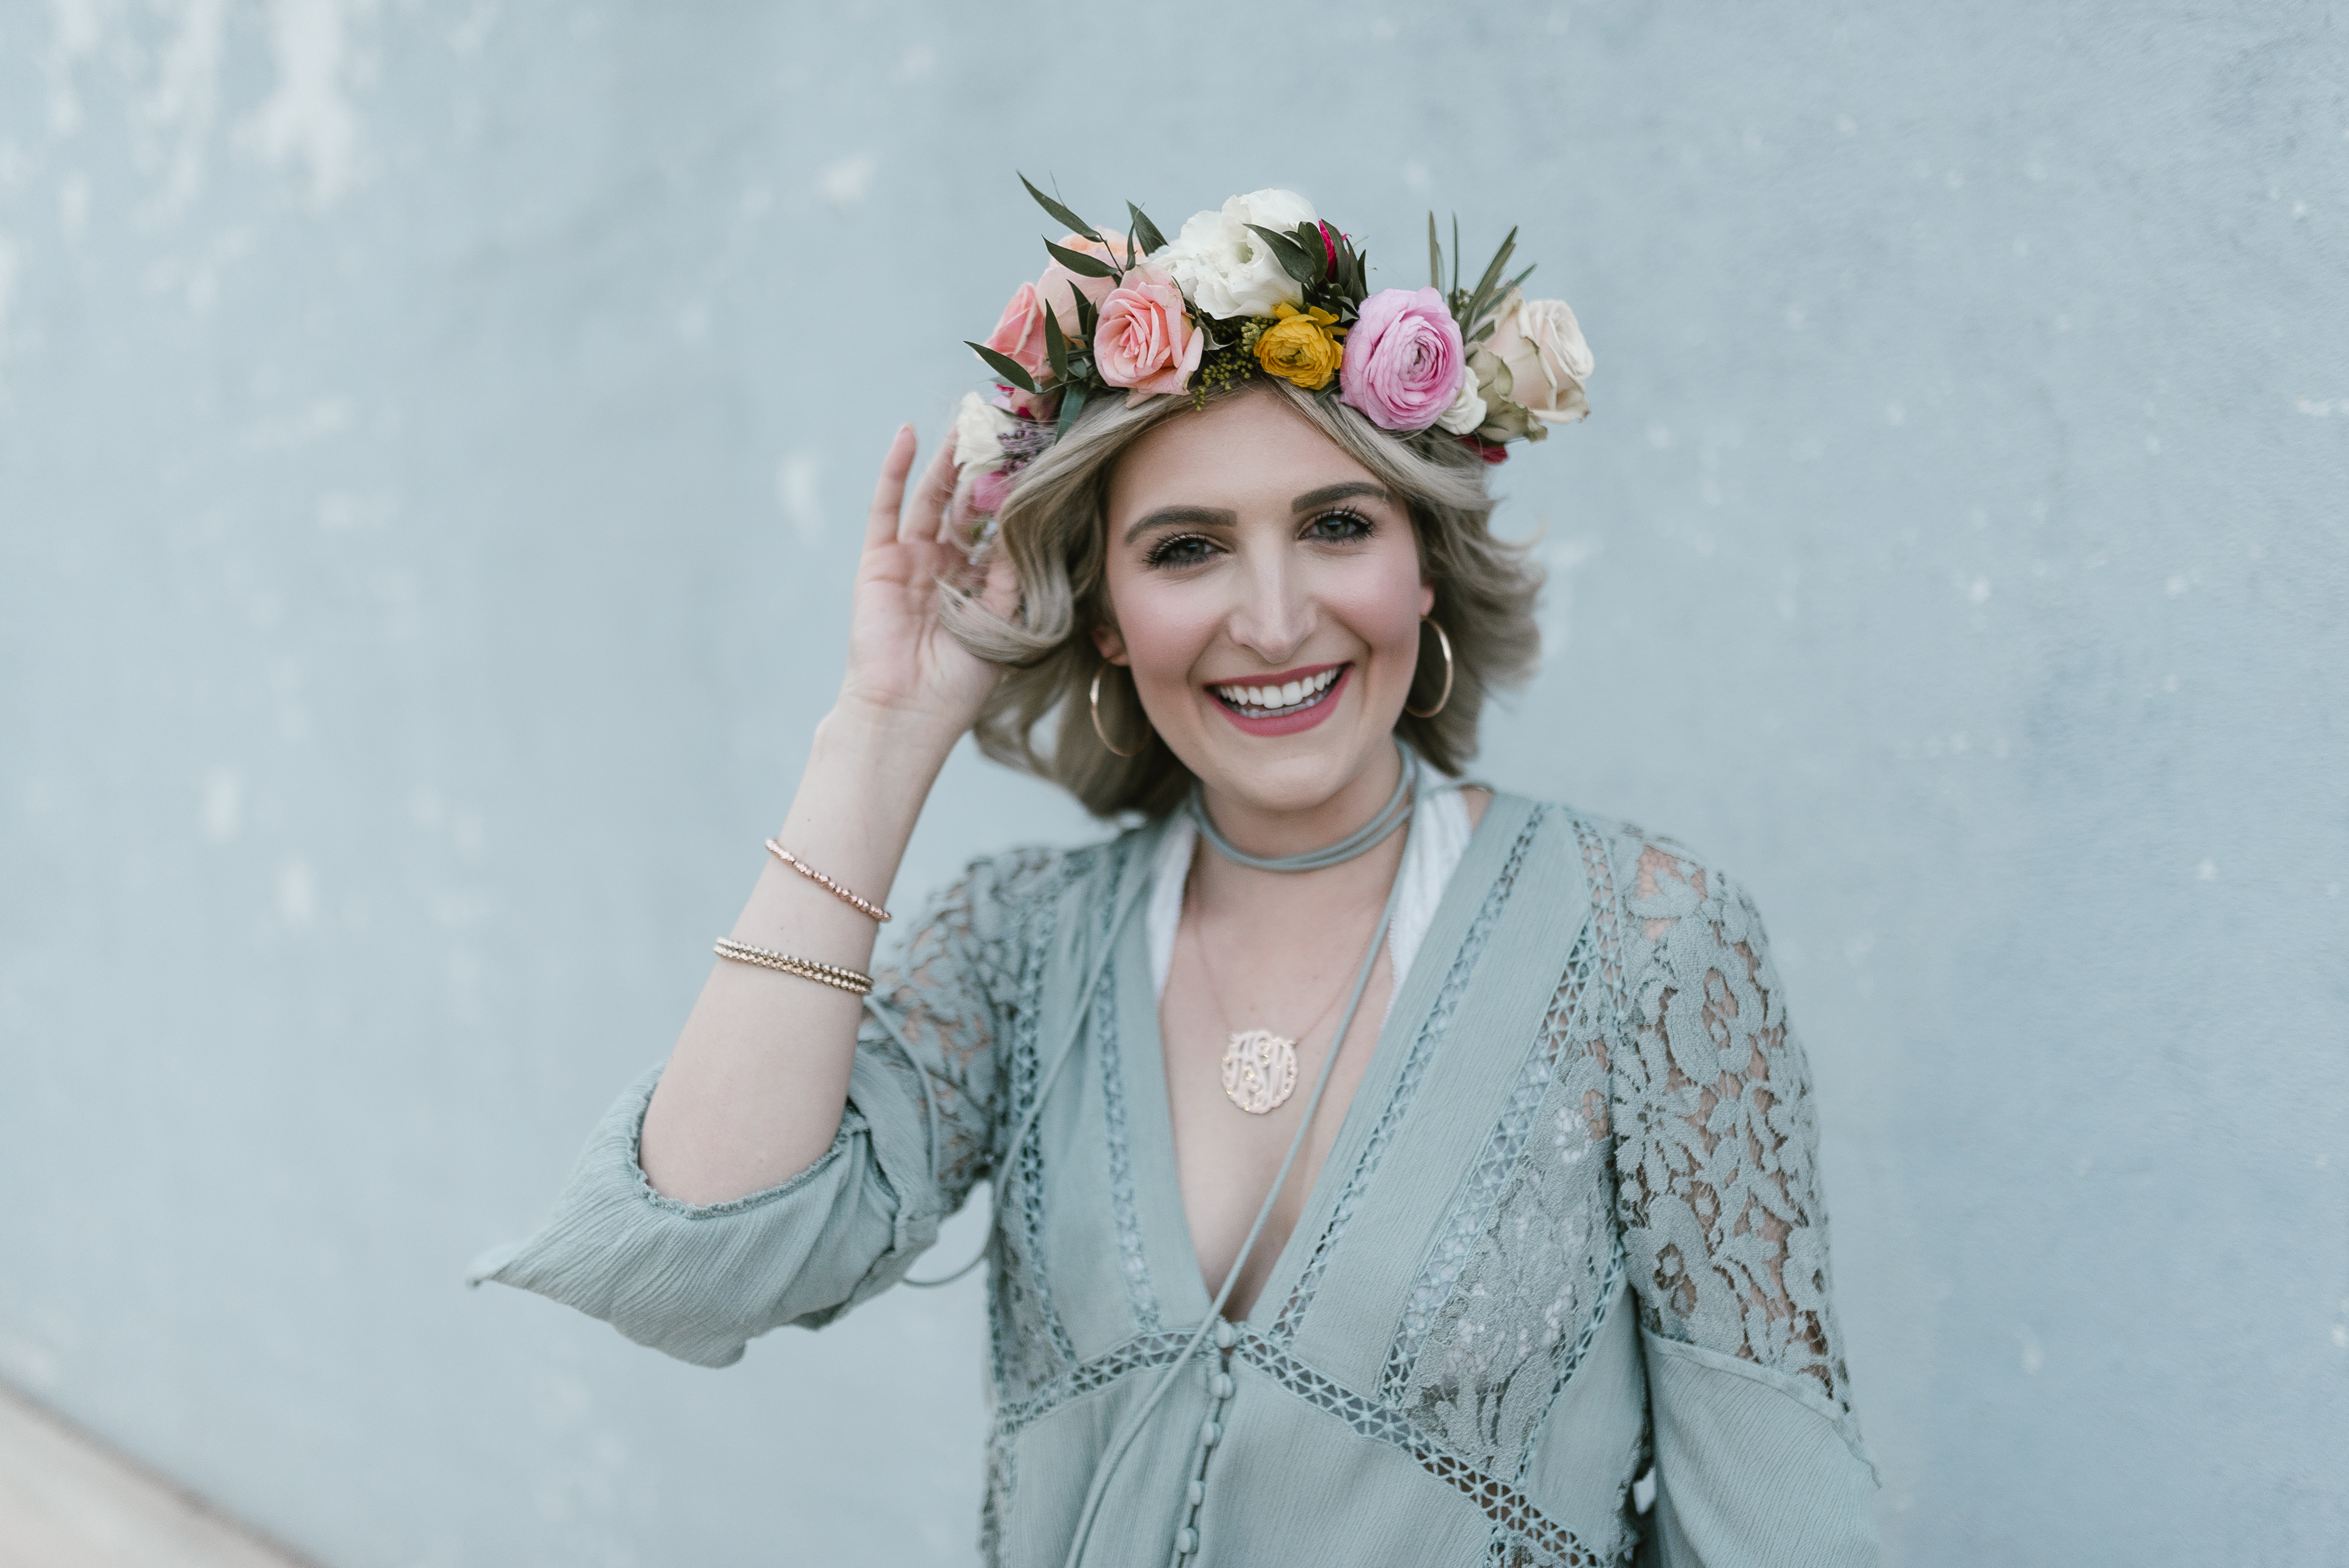 Flower Crown Party in West Texas | Bachelorette Idea | Lubbock, TX bloggers | by lifestyle and fashion blogger Audrey Madison stowe - Bachelorette Flower Crowns featured by popular Texas blogger, Audrey Madison Stowe